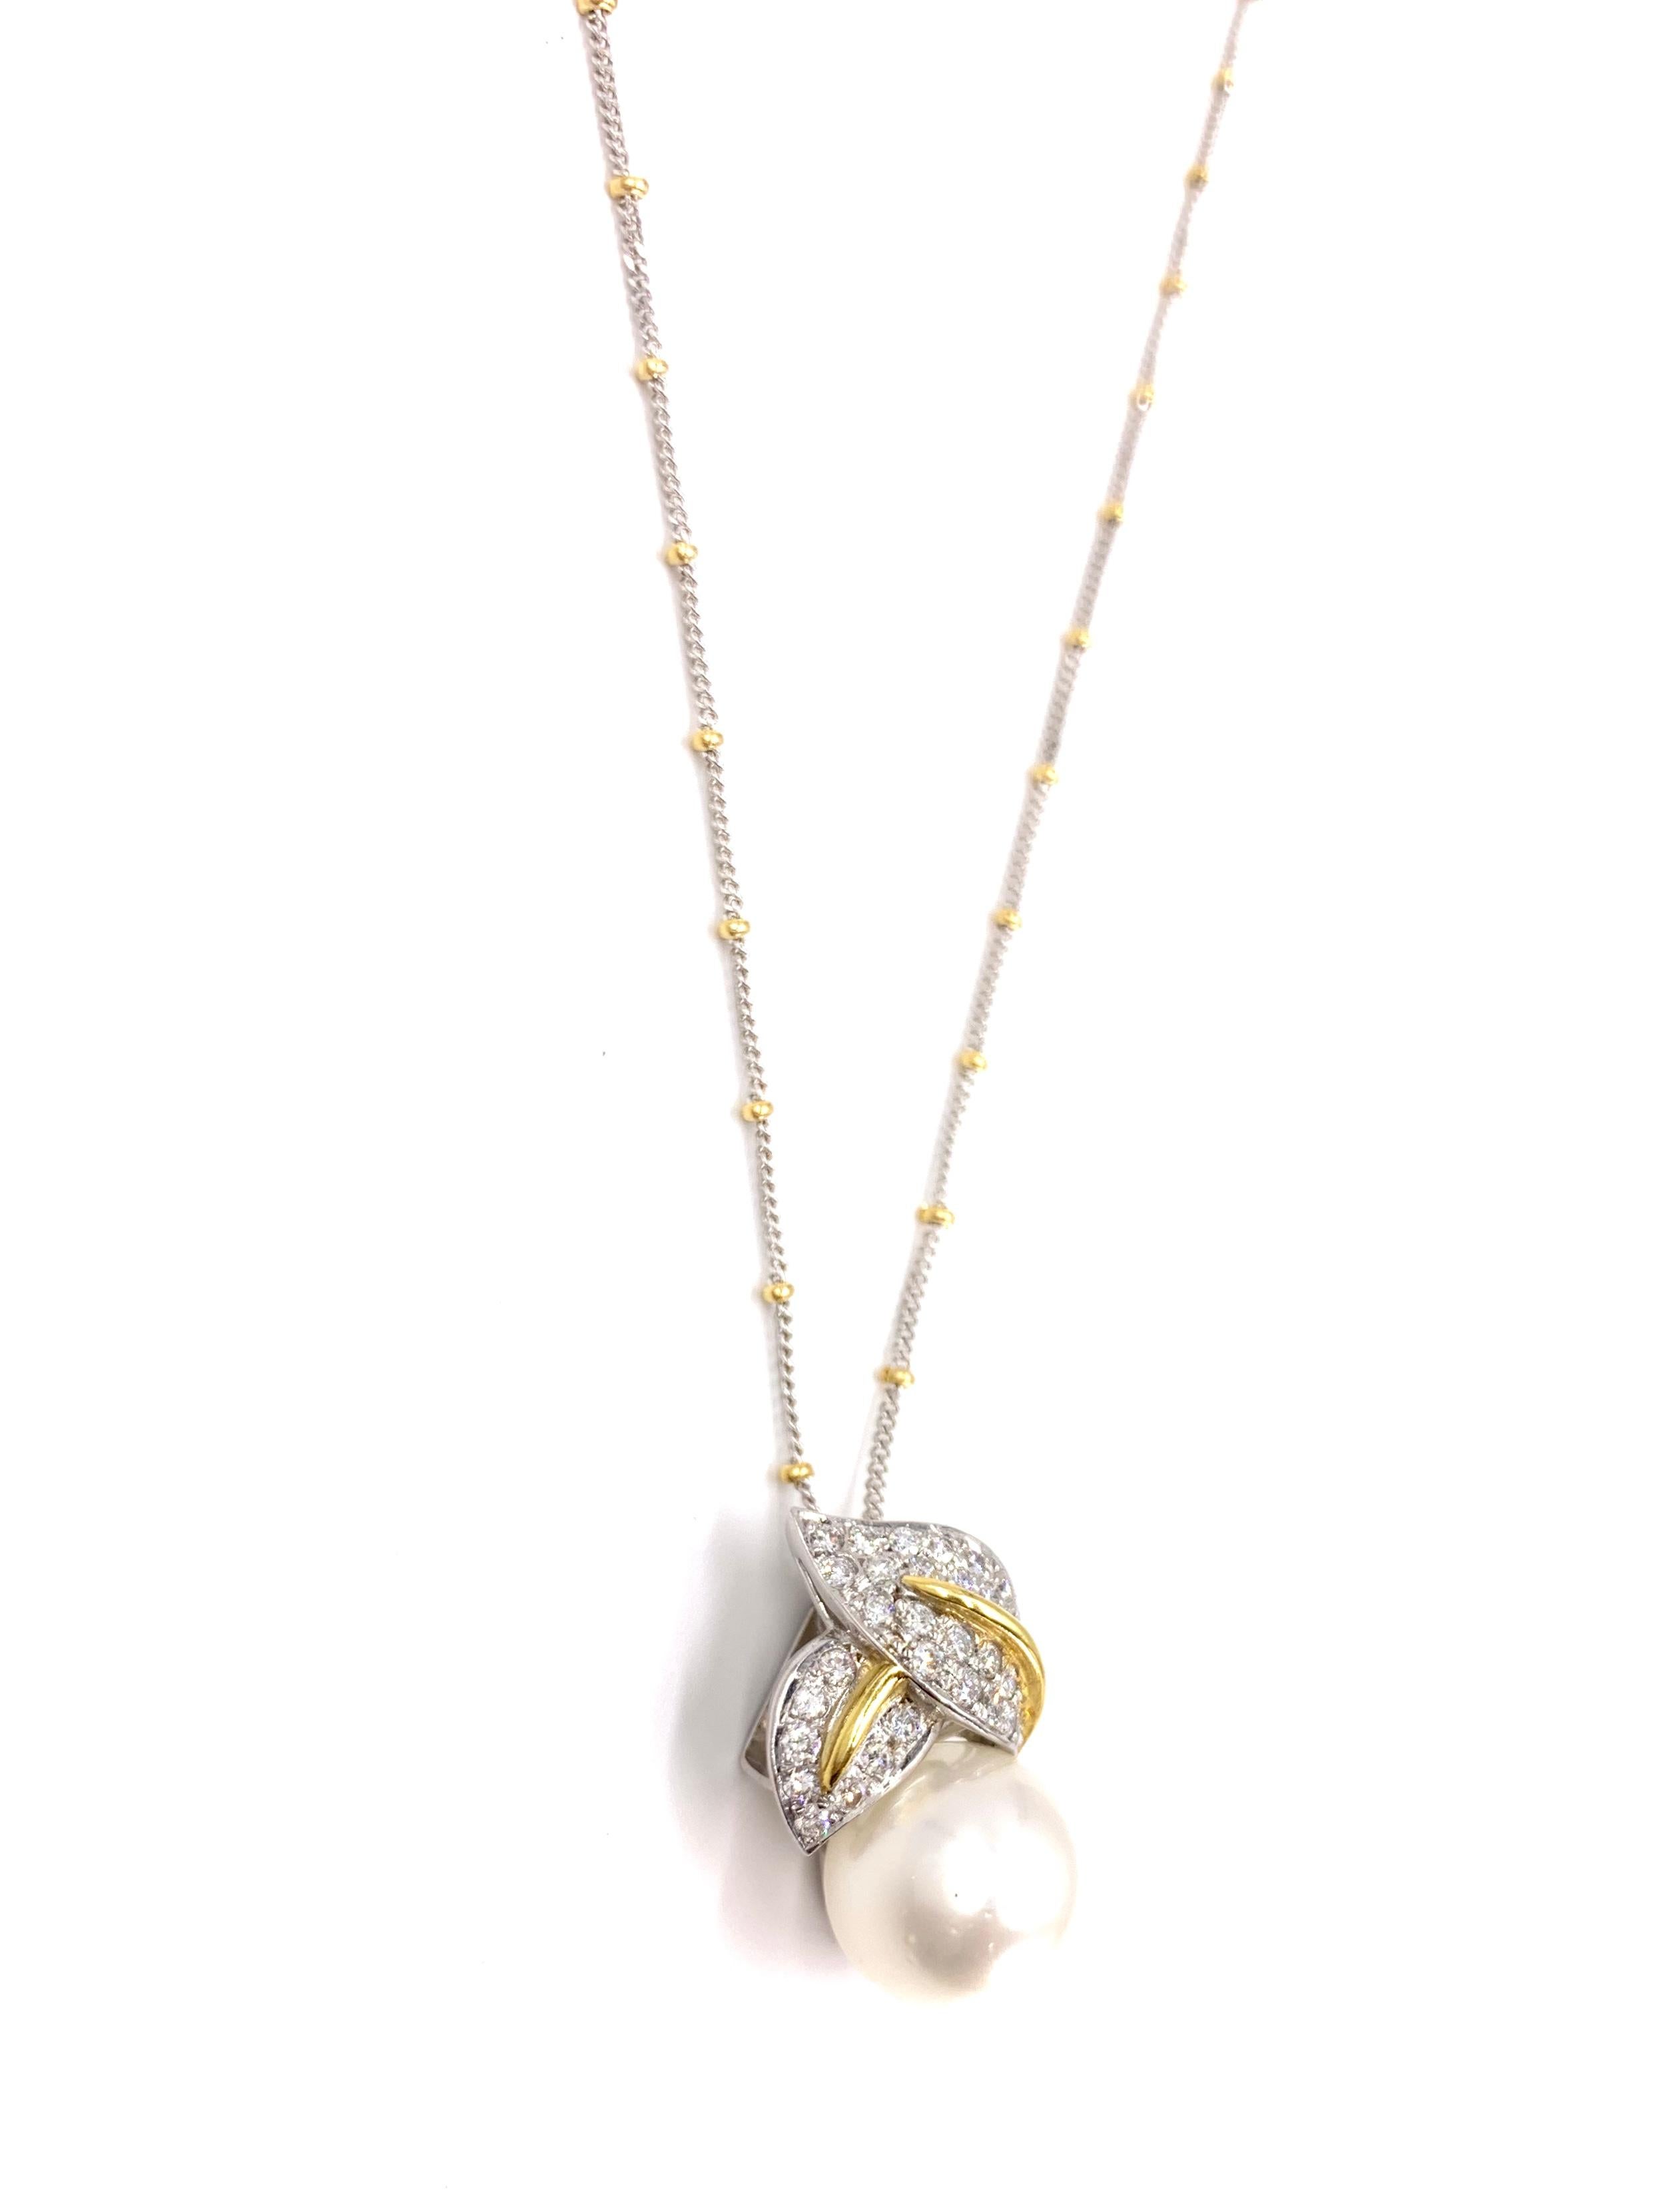 18 Karat South Sea Pearl and Diamond Leaf Pendant Necklace In Good Condition For Sale In Pikesville, MD